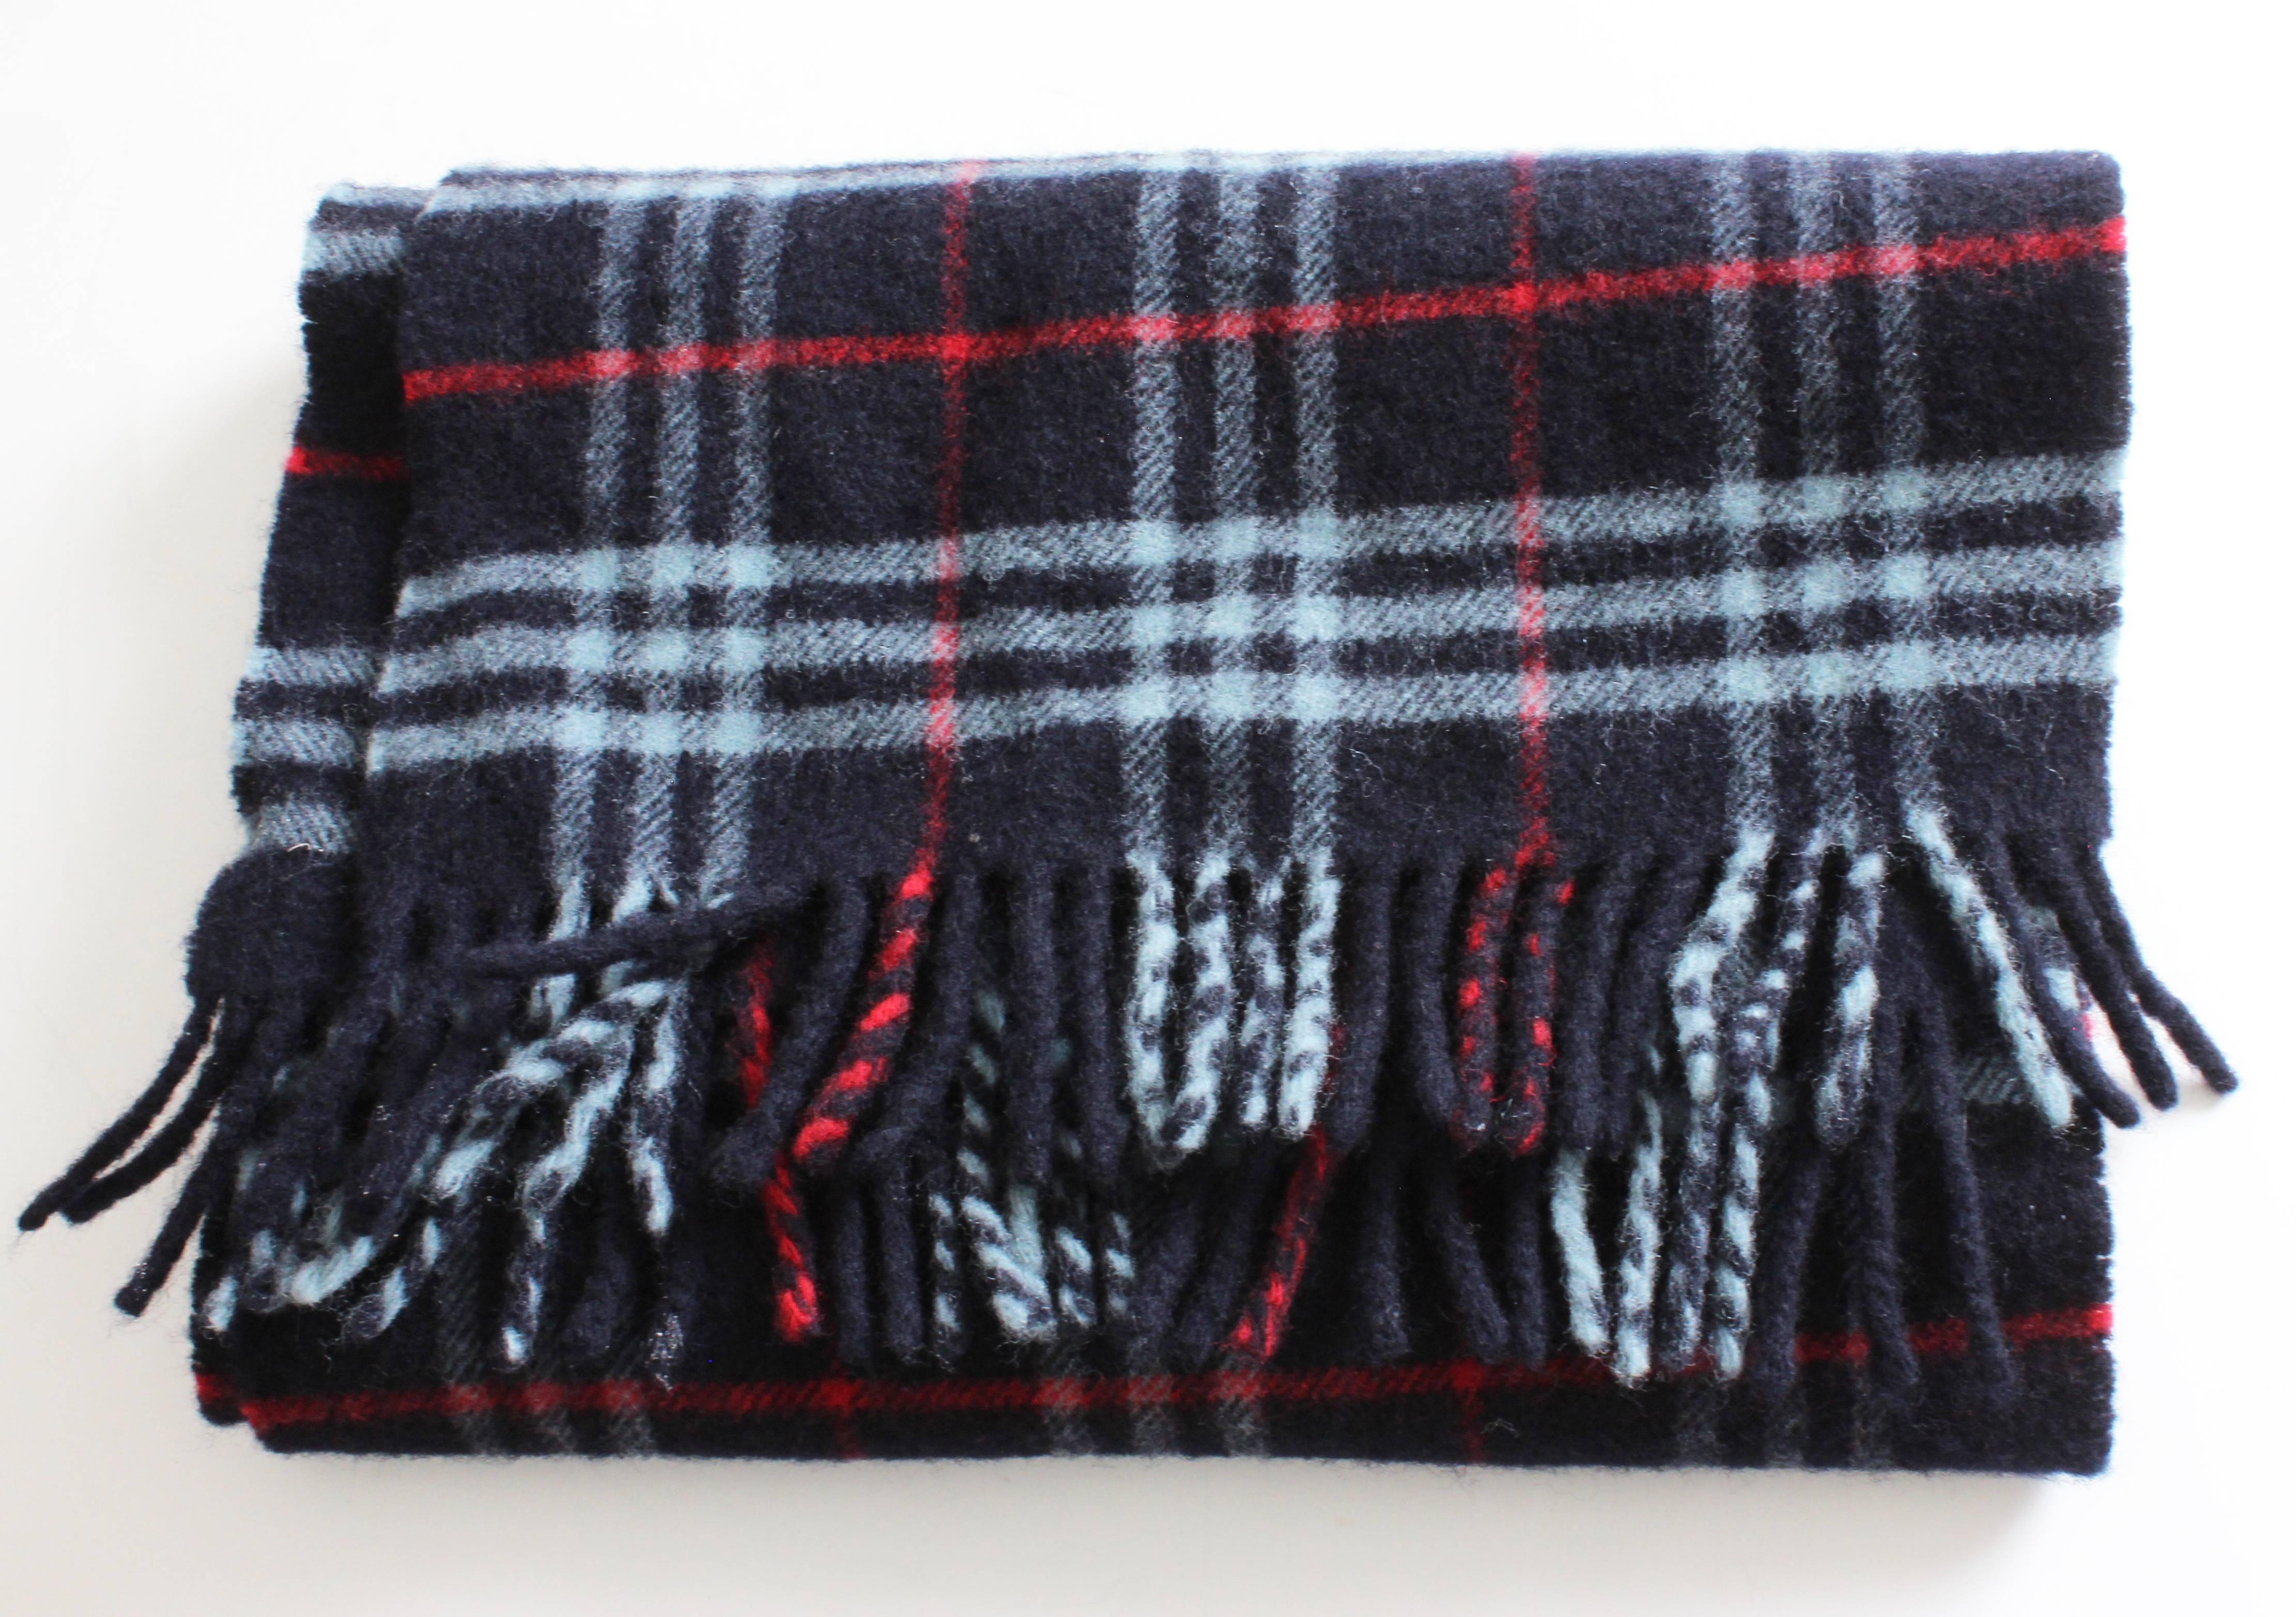 Here's a classic lambswool scarf from Burberry's London in a blue red and white check plaid.  It measures 72in L x 13in W.  In good preowned condition, we note signs of previous wear including some light piling here and there.  Tagged BURBERRYS OF